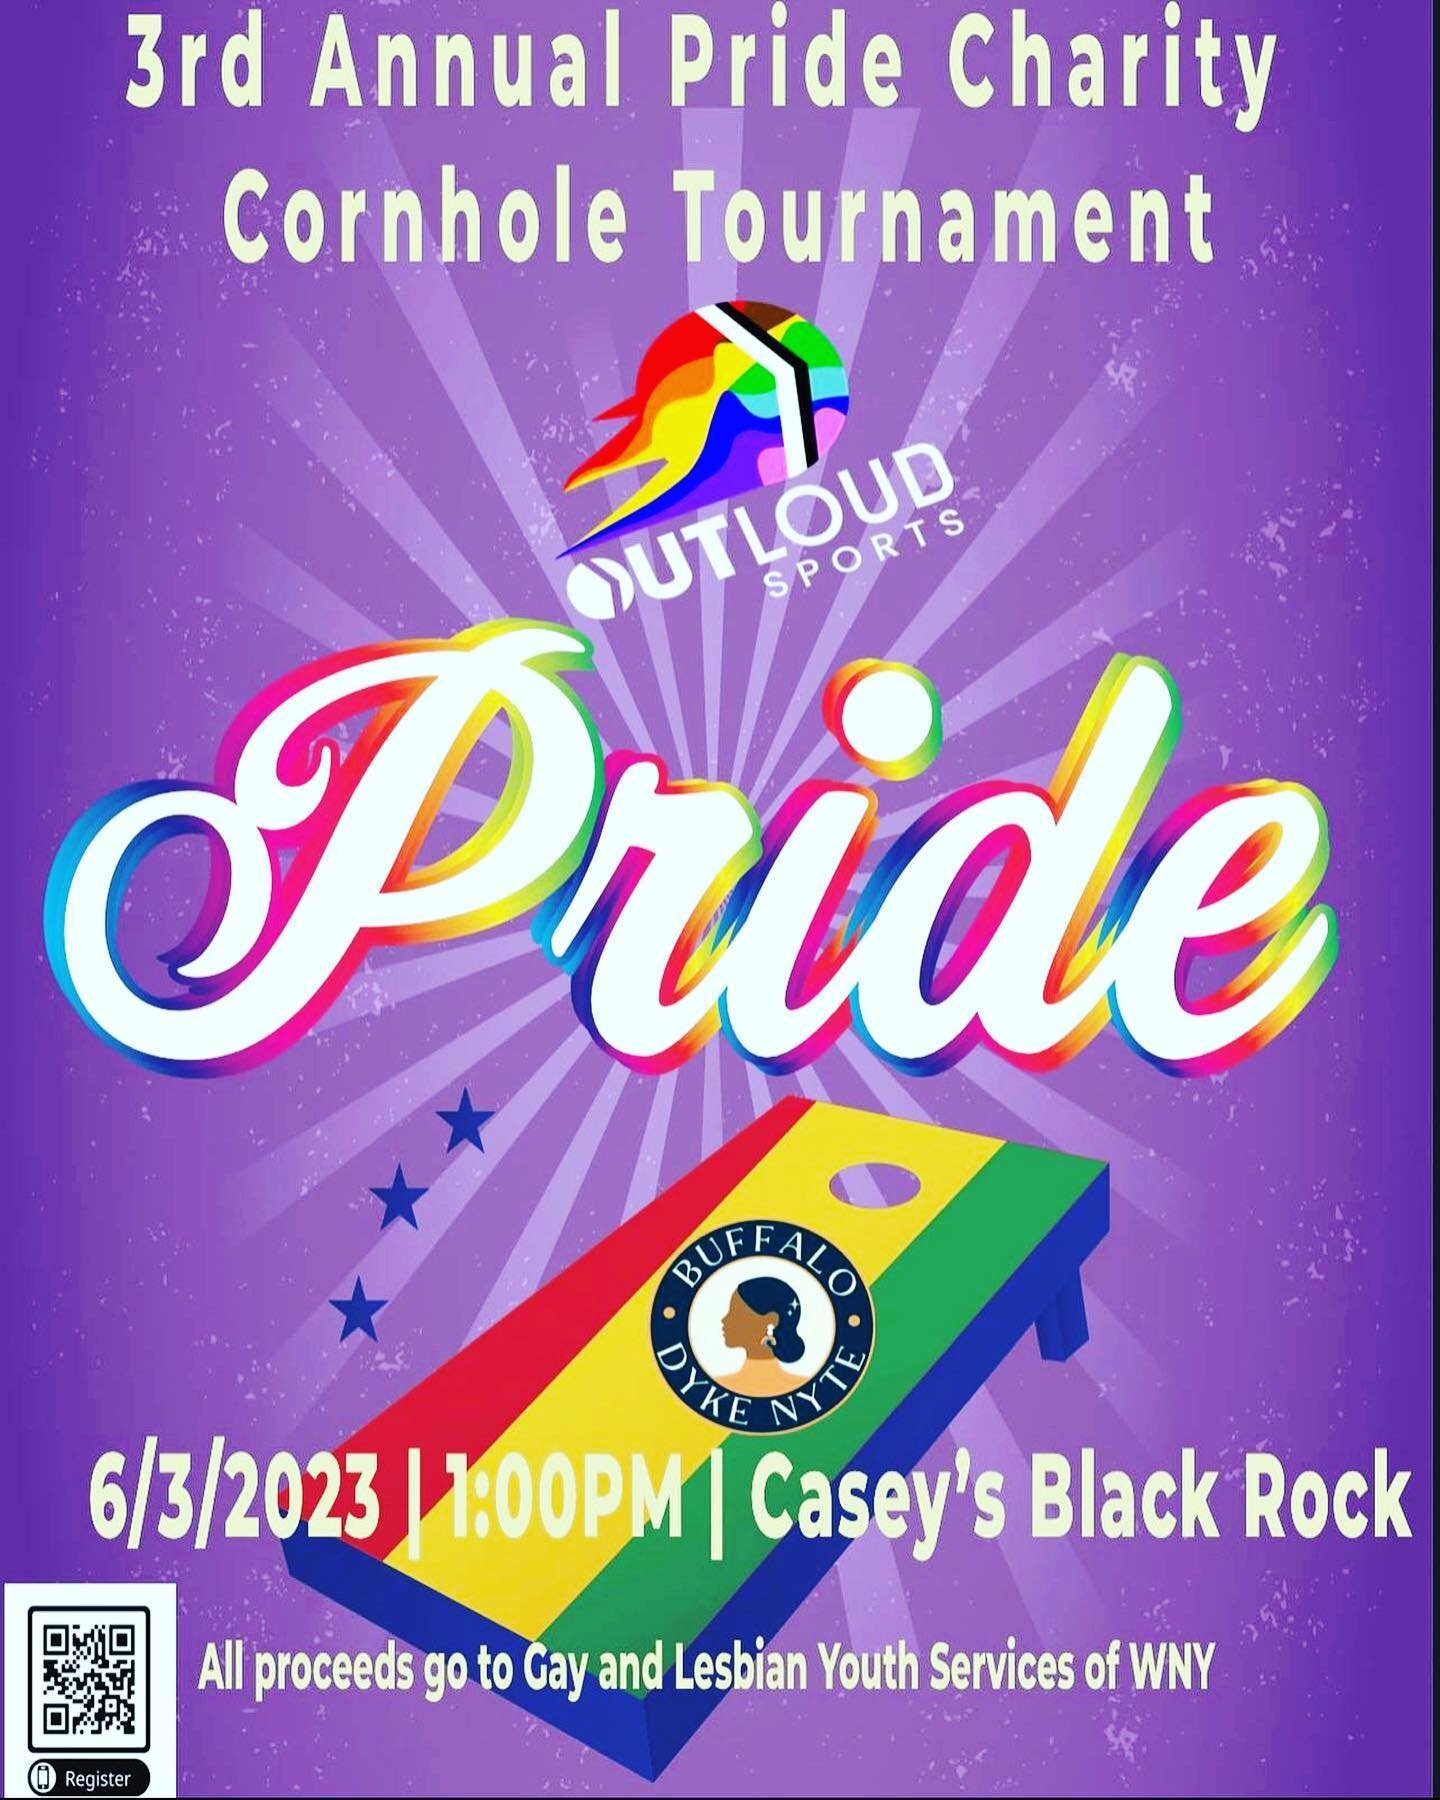 Today 5/3/23 Only use code: Pride to register for our charity cornhole tournament. We are looking for raffle donations from local businesses. There will be signed merchandise donated by the Bills up for raffle. Register here:  https://outloudbuffalo.